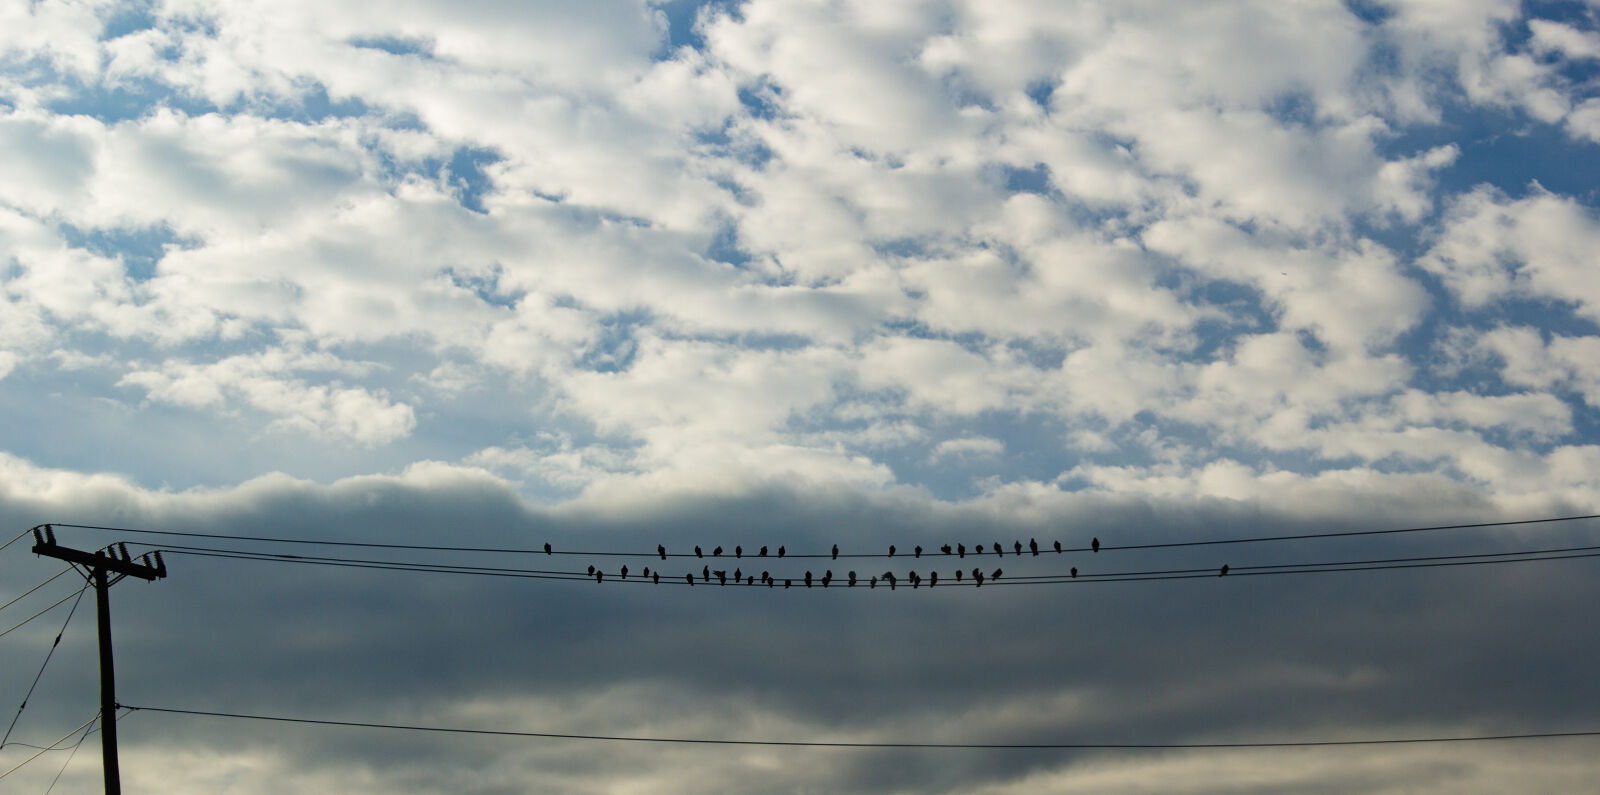 Sigma 24-105mm f/4 DG OS HSM | A sample photo. Birds, clouds, fall photography